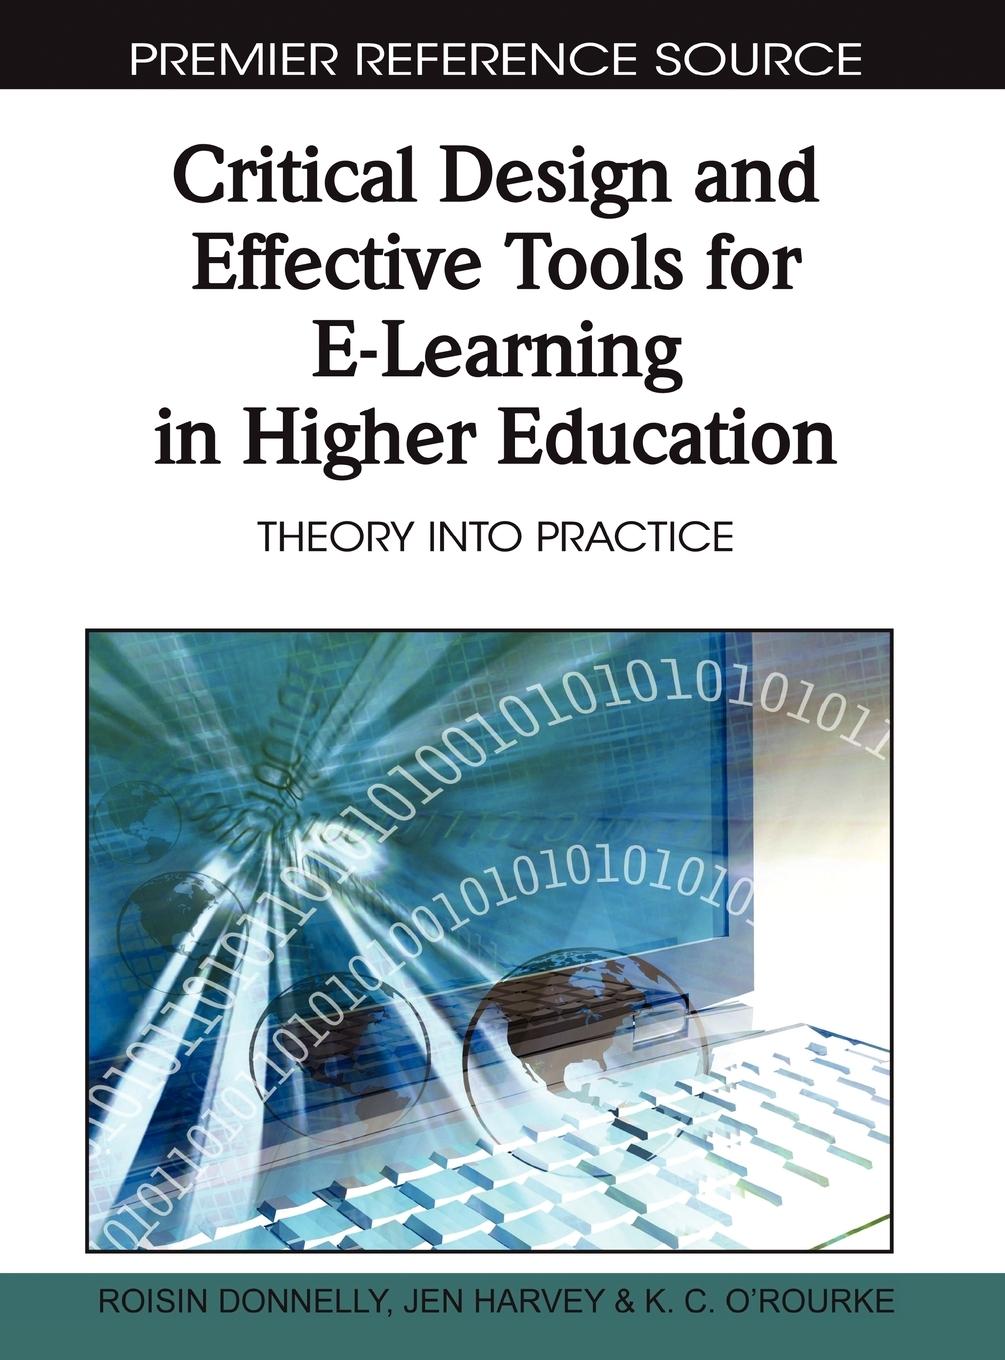 Critical Design and Effective Tools for E-Learning in Higher Education / Theory into Practice / Kevin O'Rourke / Buch / HC gerader Rücken kaschiert / Englisch / 2010 / Information Science Reference - O'Rourke, Kevin